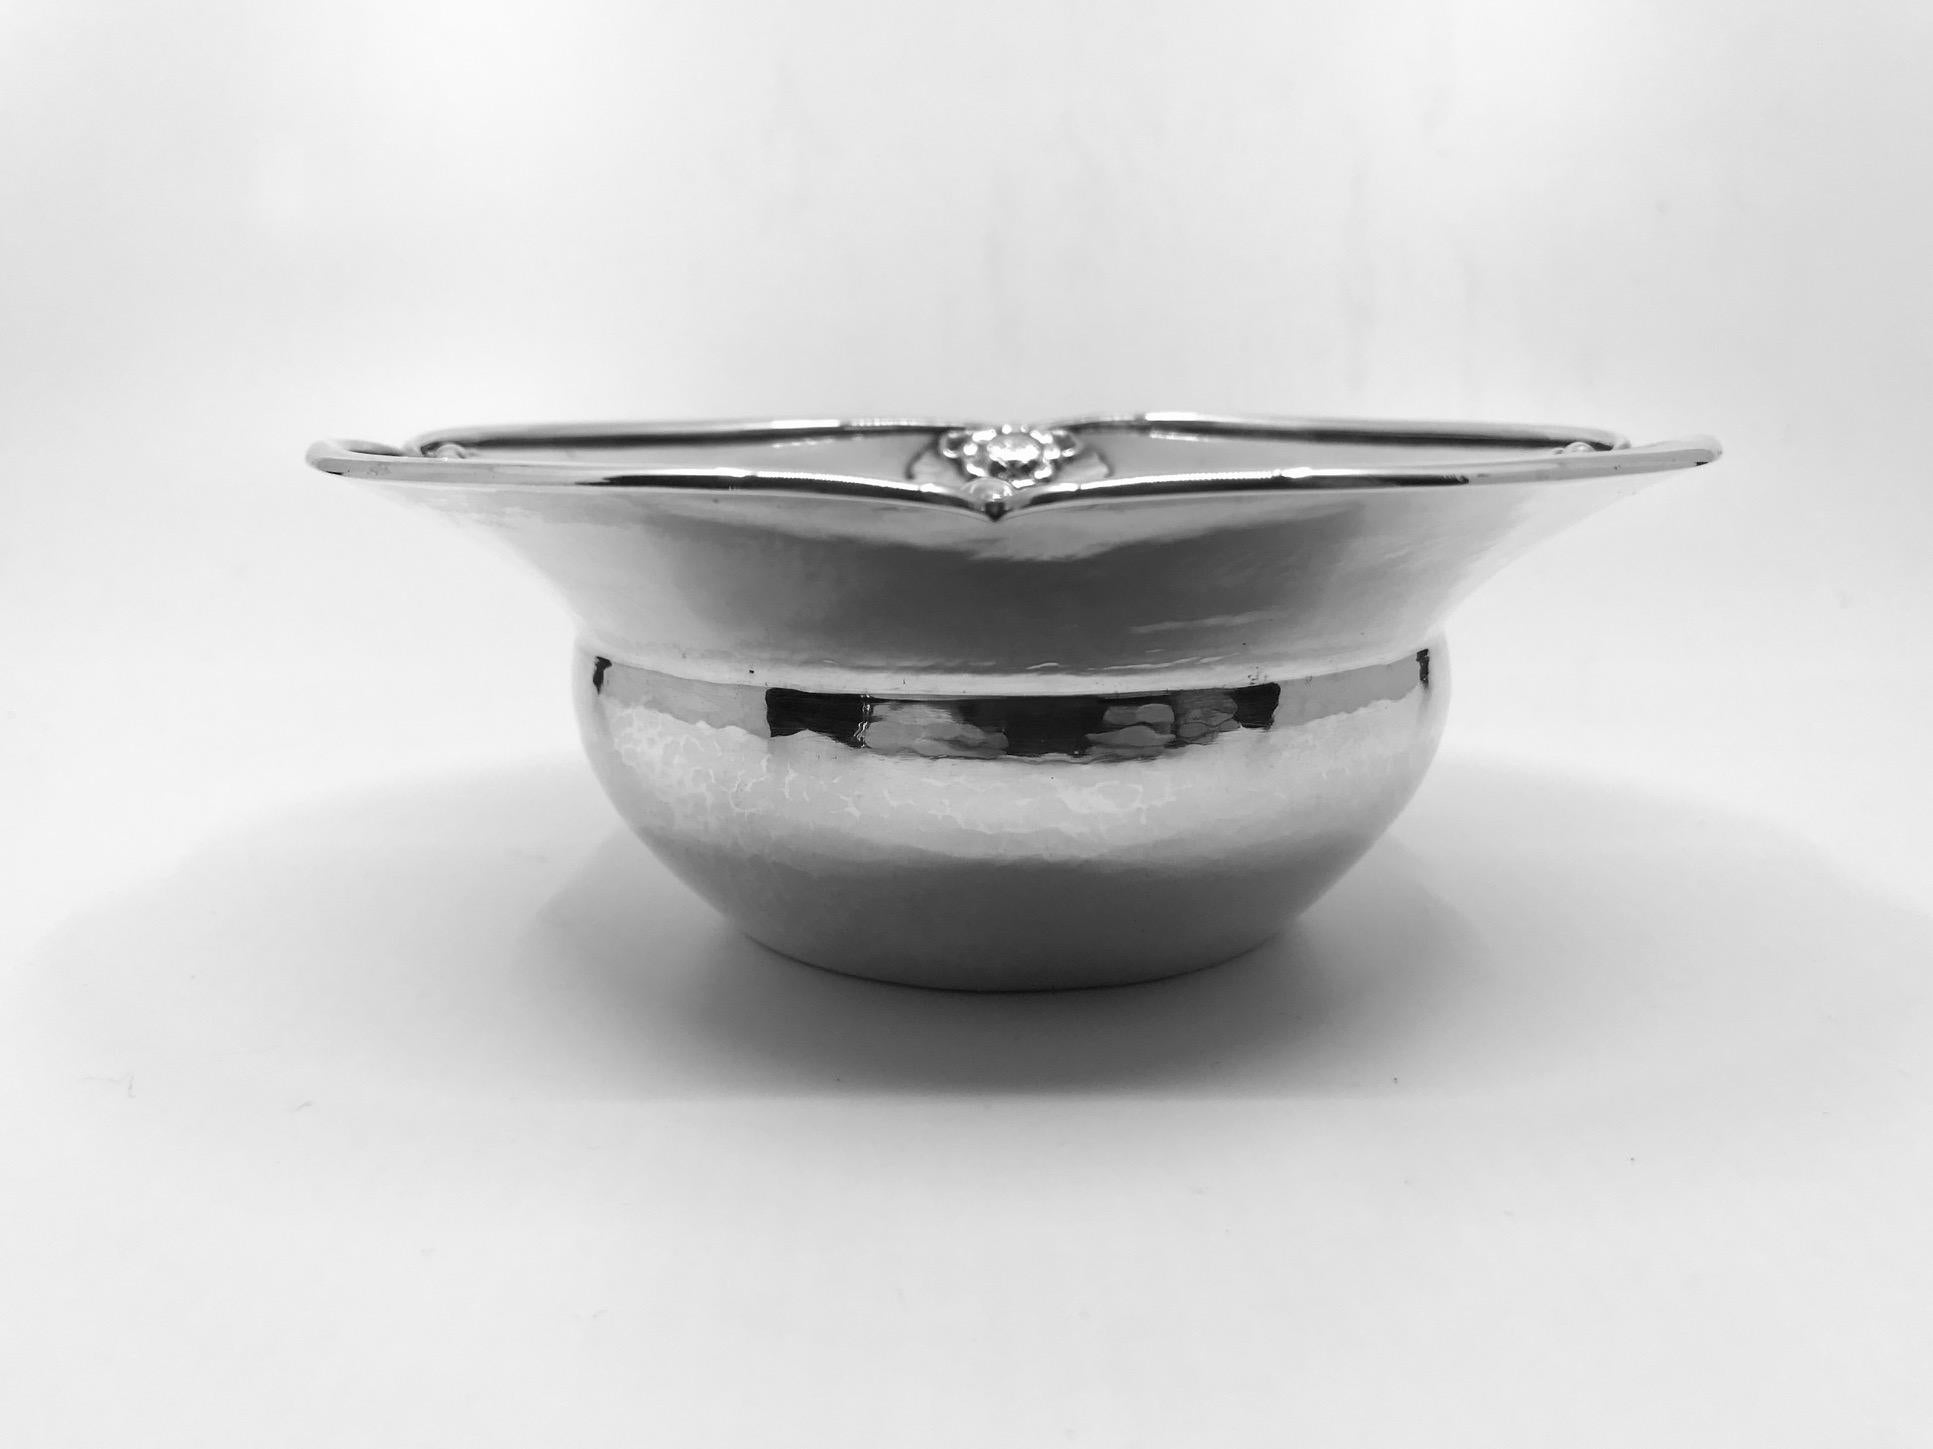 Small silver Georg Jensen bowl with floral details, design #25 by Georg Jensen.
Measures: 6 1/4? in diameter and 2 3/8? in height (16cm x 6cm).
Vintage Georg Jensen hallmark from 1919-1927, 830s.